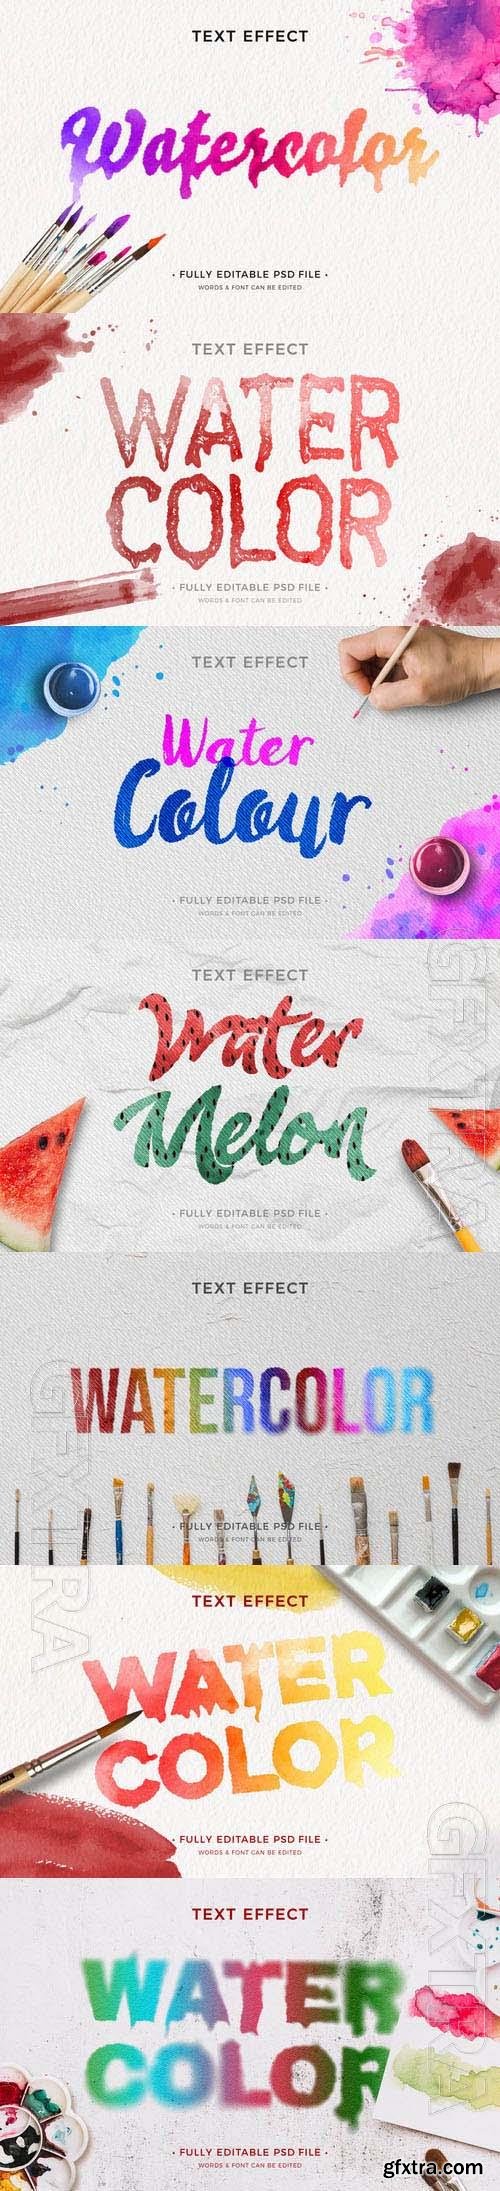 PSD watercolor text effect